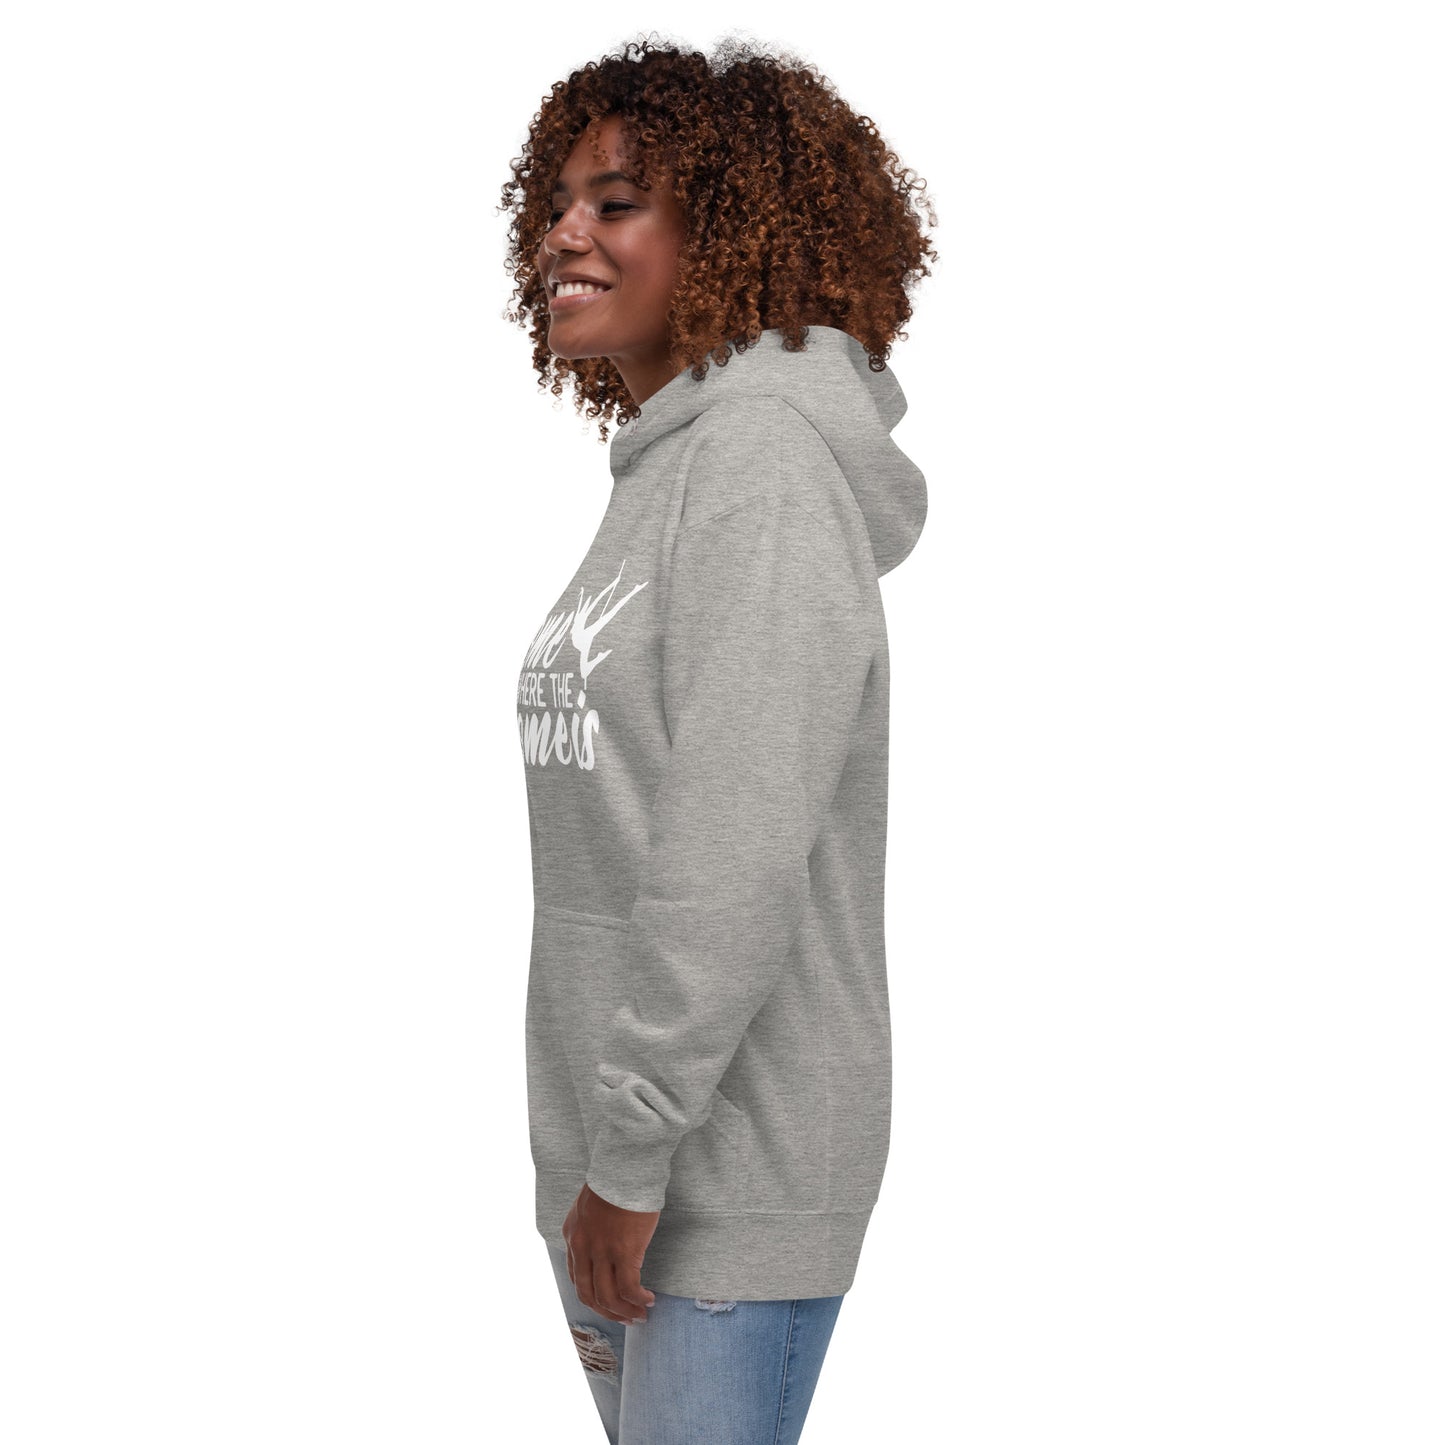 Home Is Where The Chrome Is - Unisex Hoodie